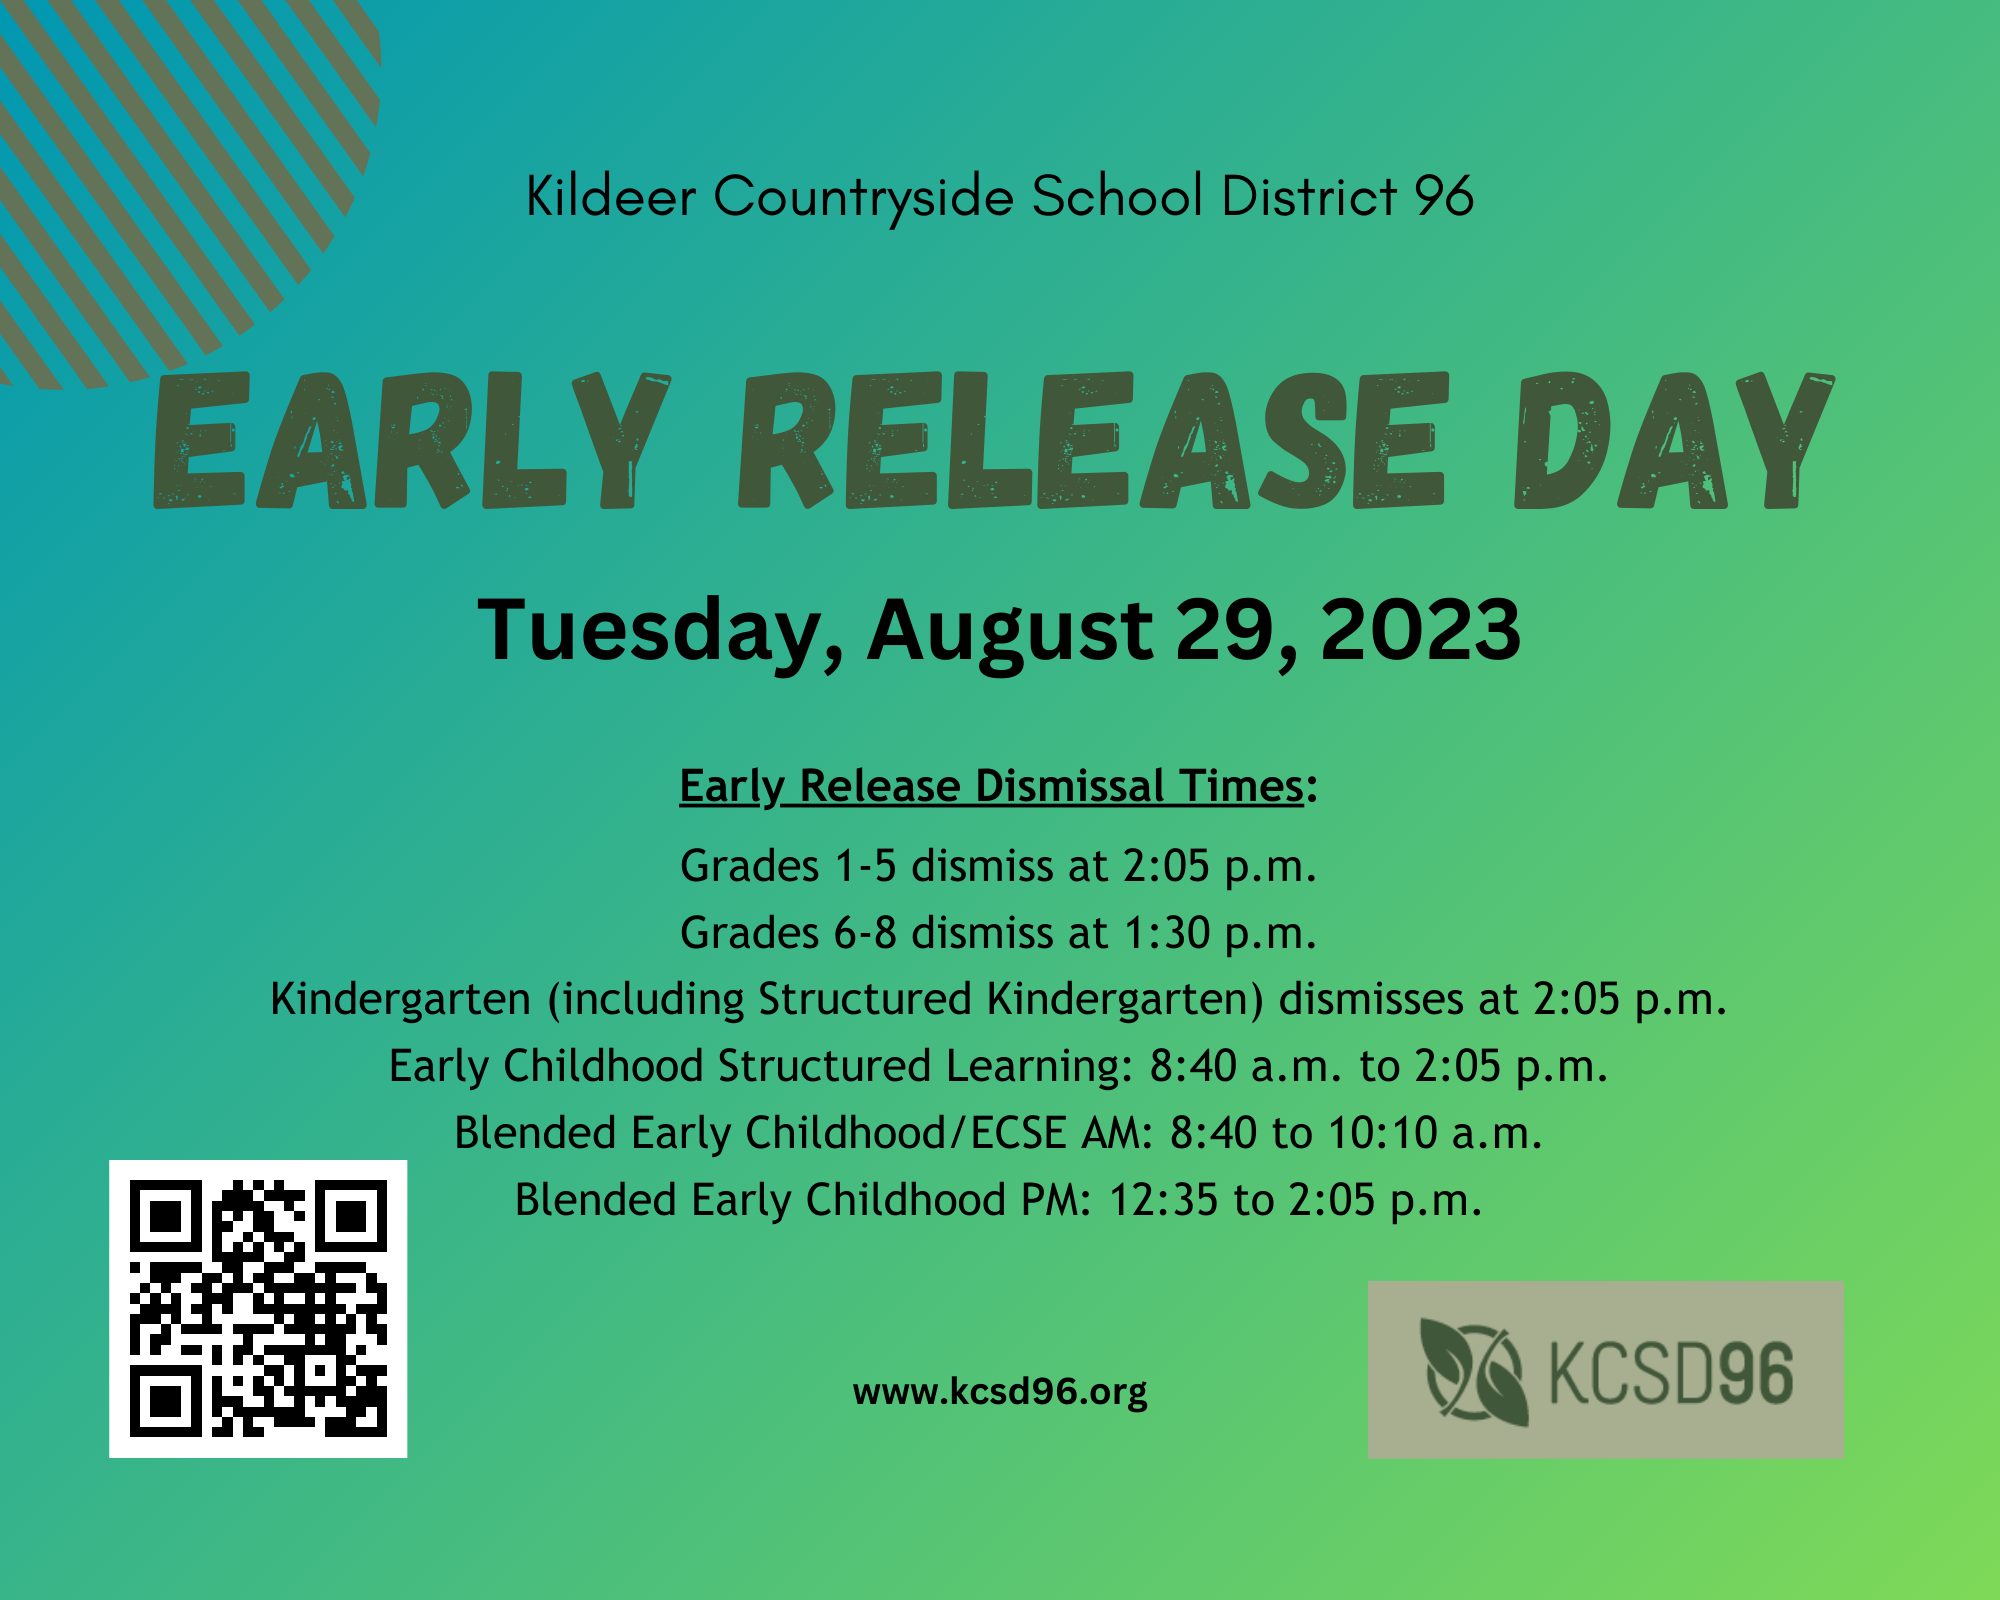 August 29, 2023: Early Release Day